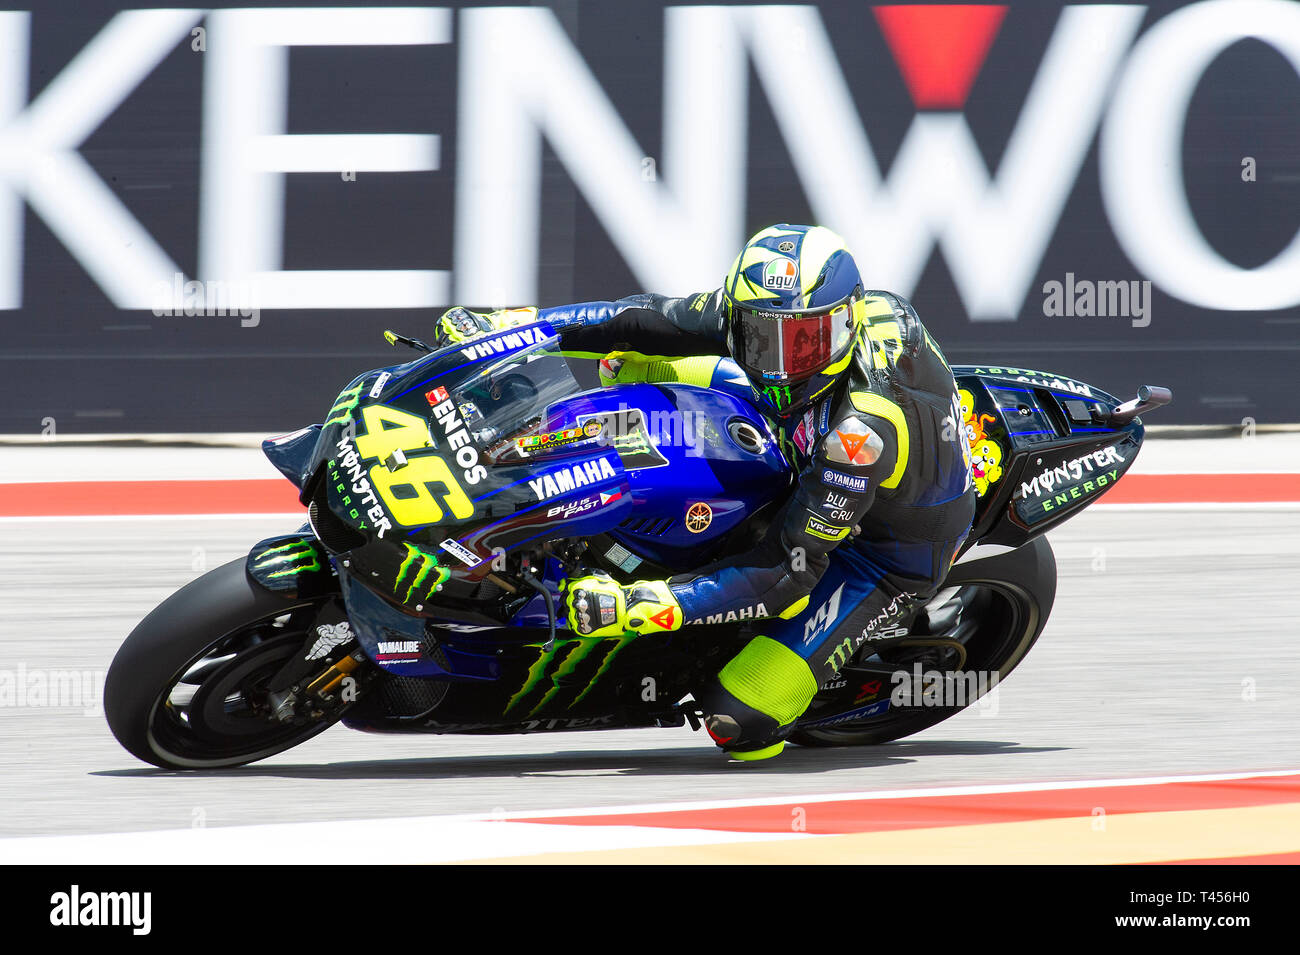 April 13, 2019: Valentino Rossi #46 with Monster Energy Yamaha MotoGP Team  - Yamaha YZR-M1 in